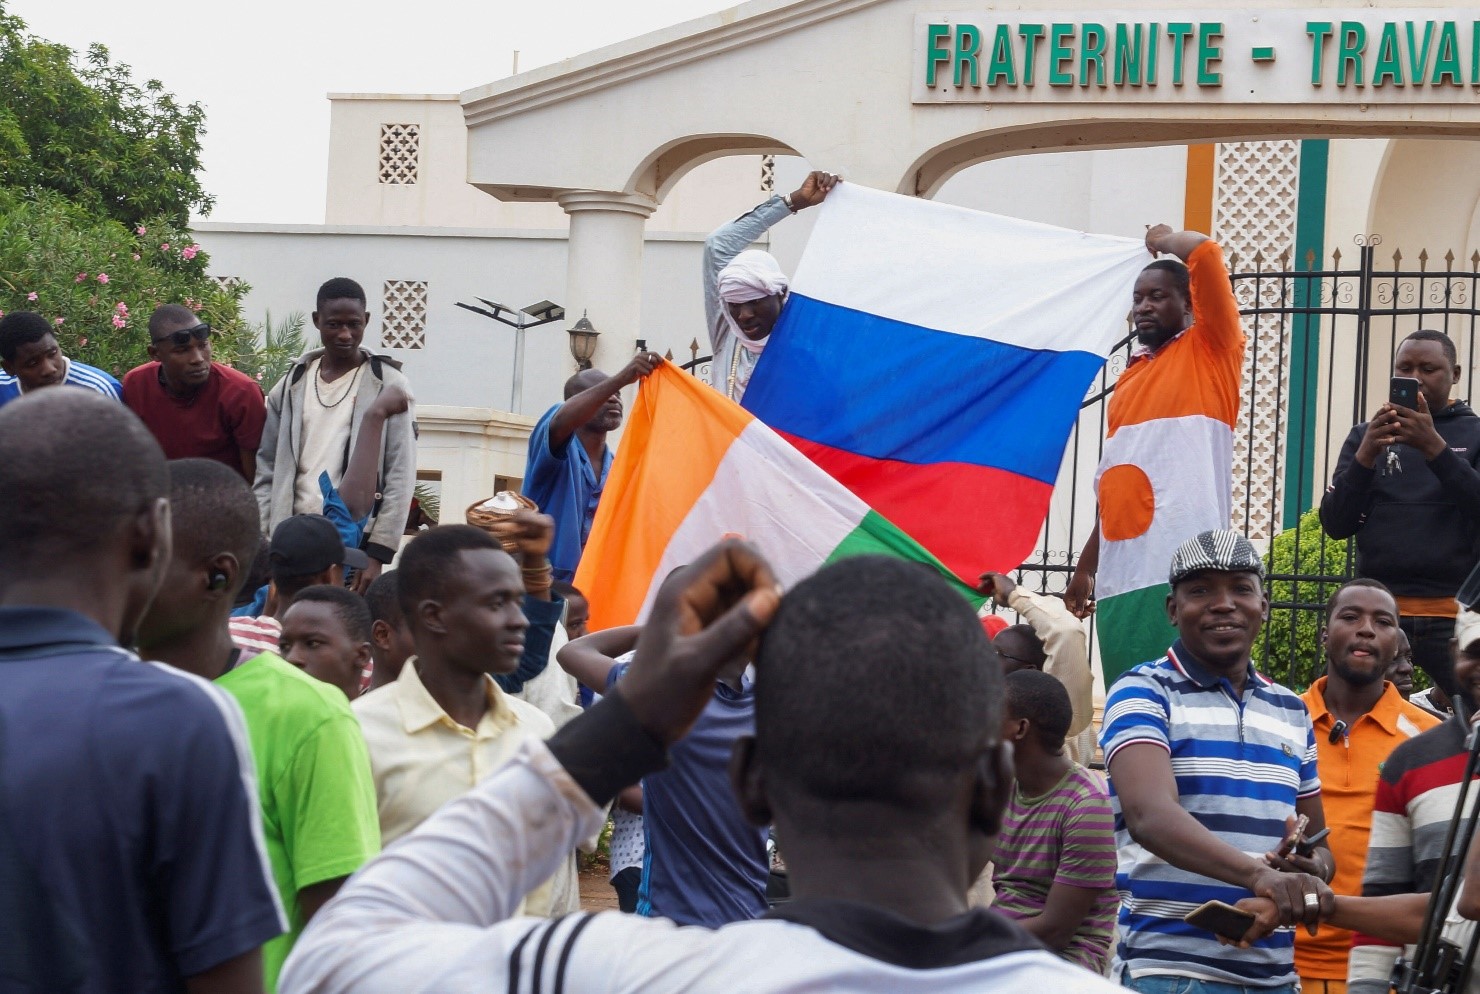 France is about to invade Niger: comment by Officers Union chief Alexander Ivanov